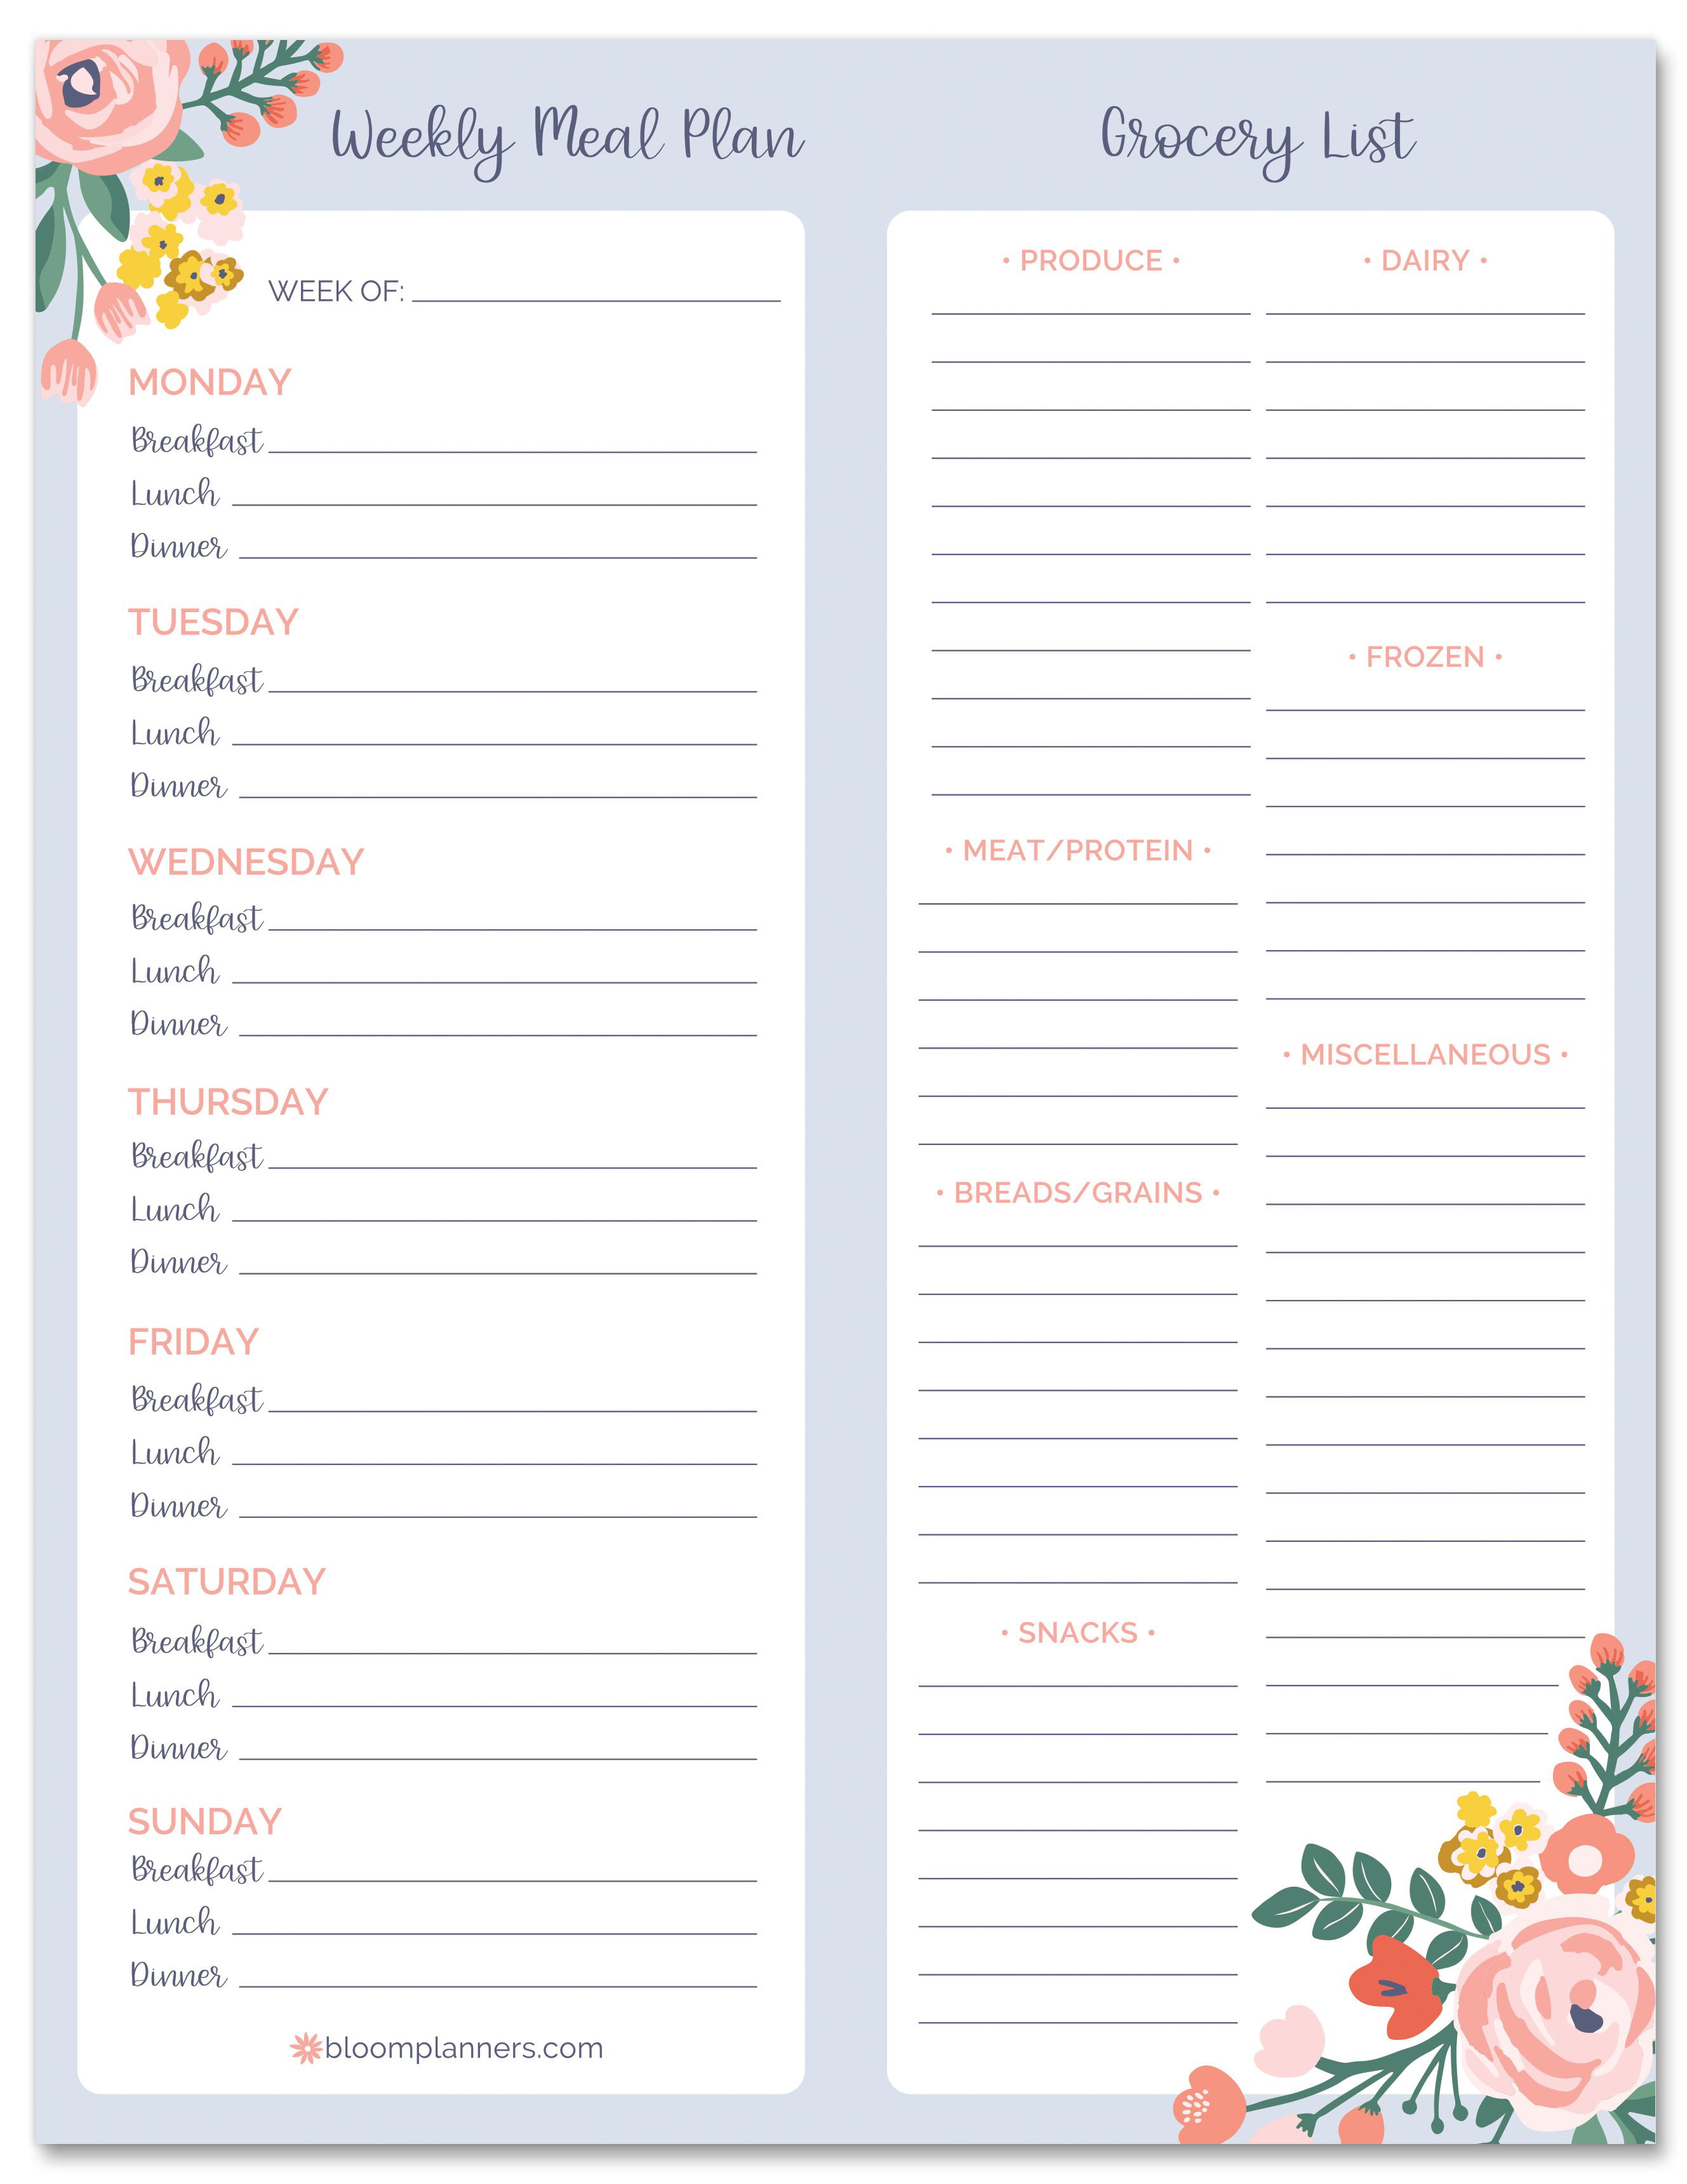 Weekly Meal Planner for kitchen with Tear Off Shopping List 6x9 Inch Meal Planning Notepad Magnetic Meal Planner Pad for Fridge 52 Undated Tear-off Sheets Notebook for Meal Planner and Grocery List with Magnet